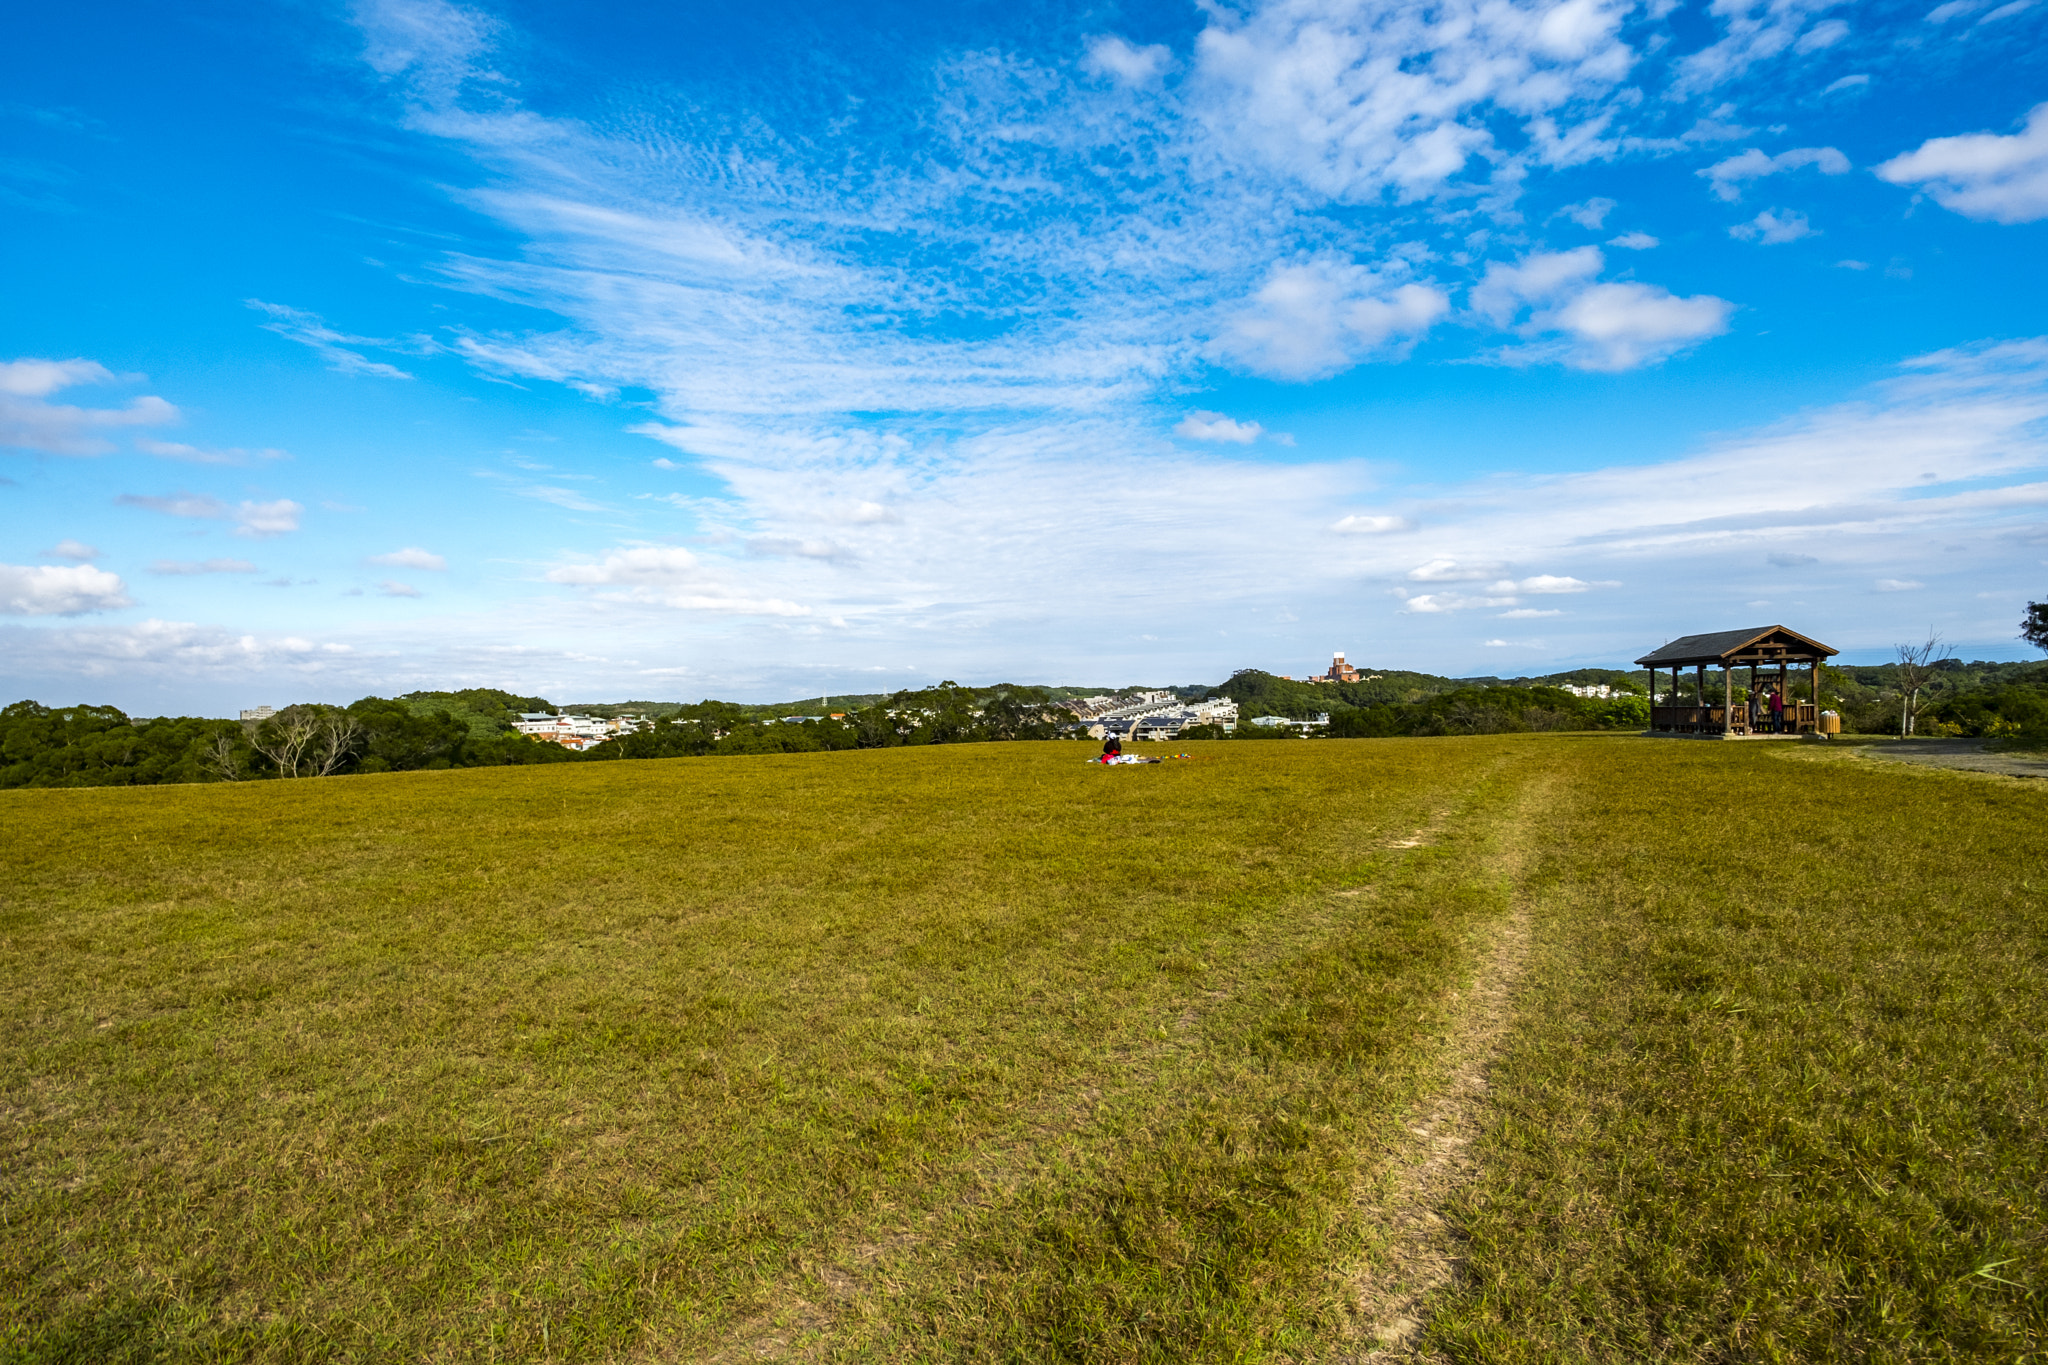 ZEISS Touit 12mm F2.8 sample photo. Silent afternoon in grasslands photography